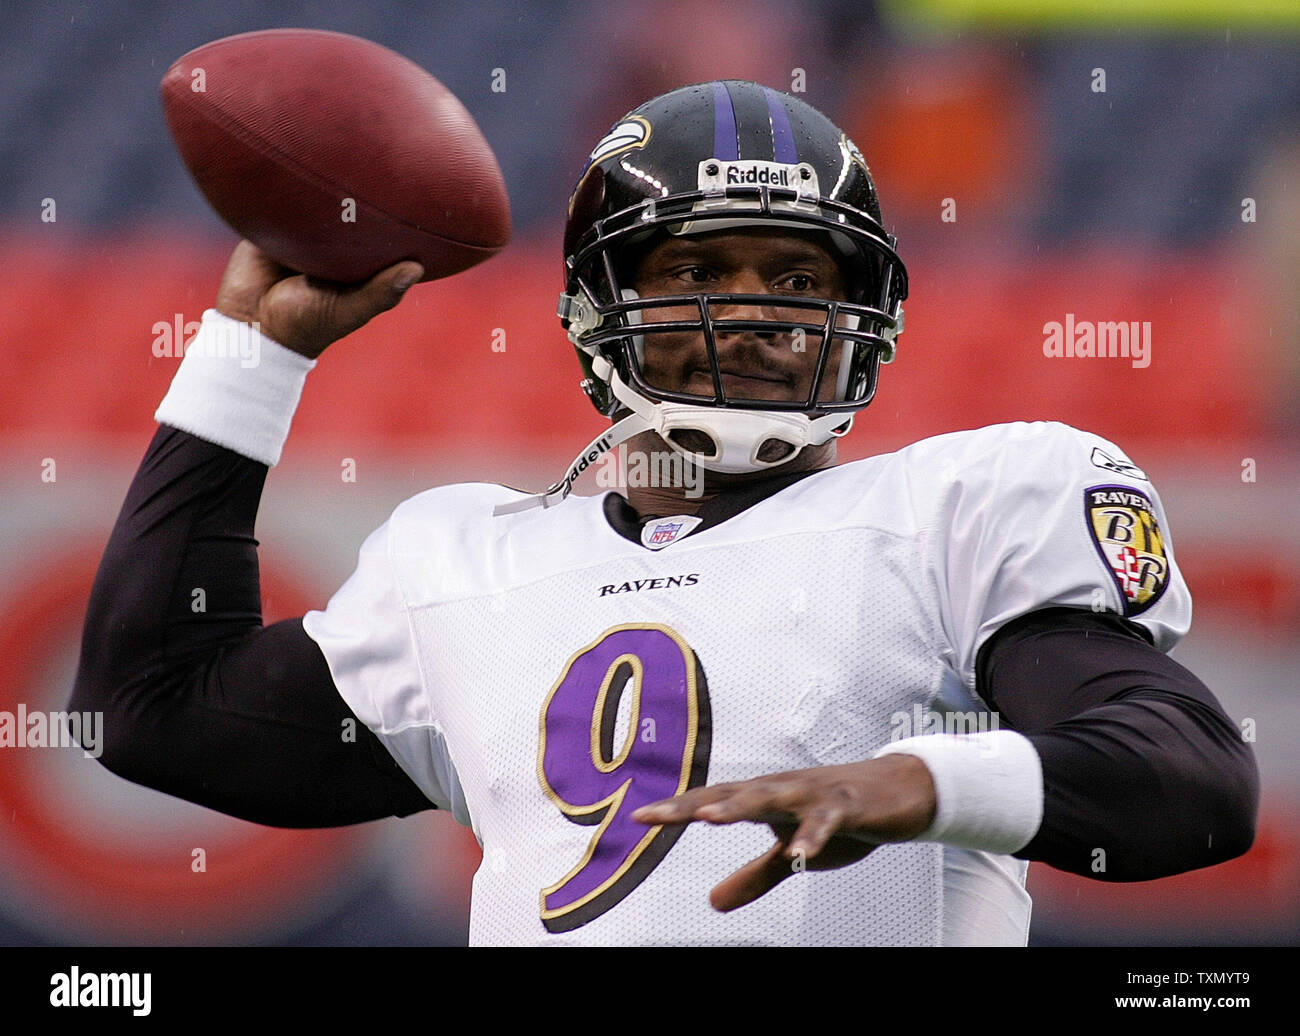 Baltimore Ravens starting quarterback Steve McNair warms up prior to game  against the Denver Broncos at Invesco Field in Denver September 9, 2006.  The Ravens are undefeated entering the contest against the